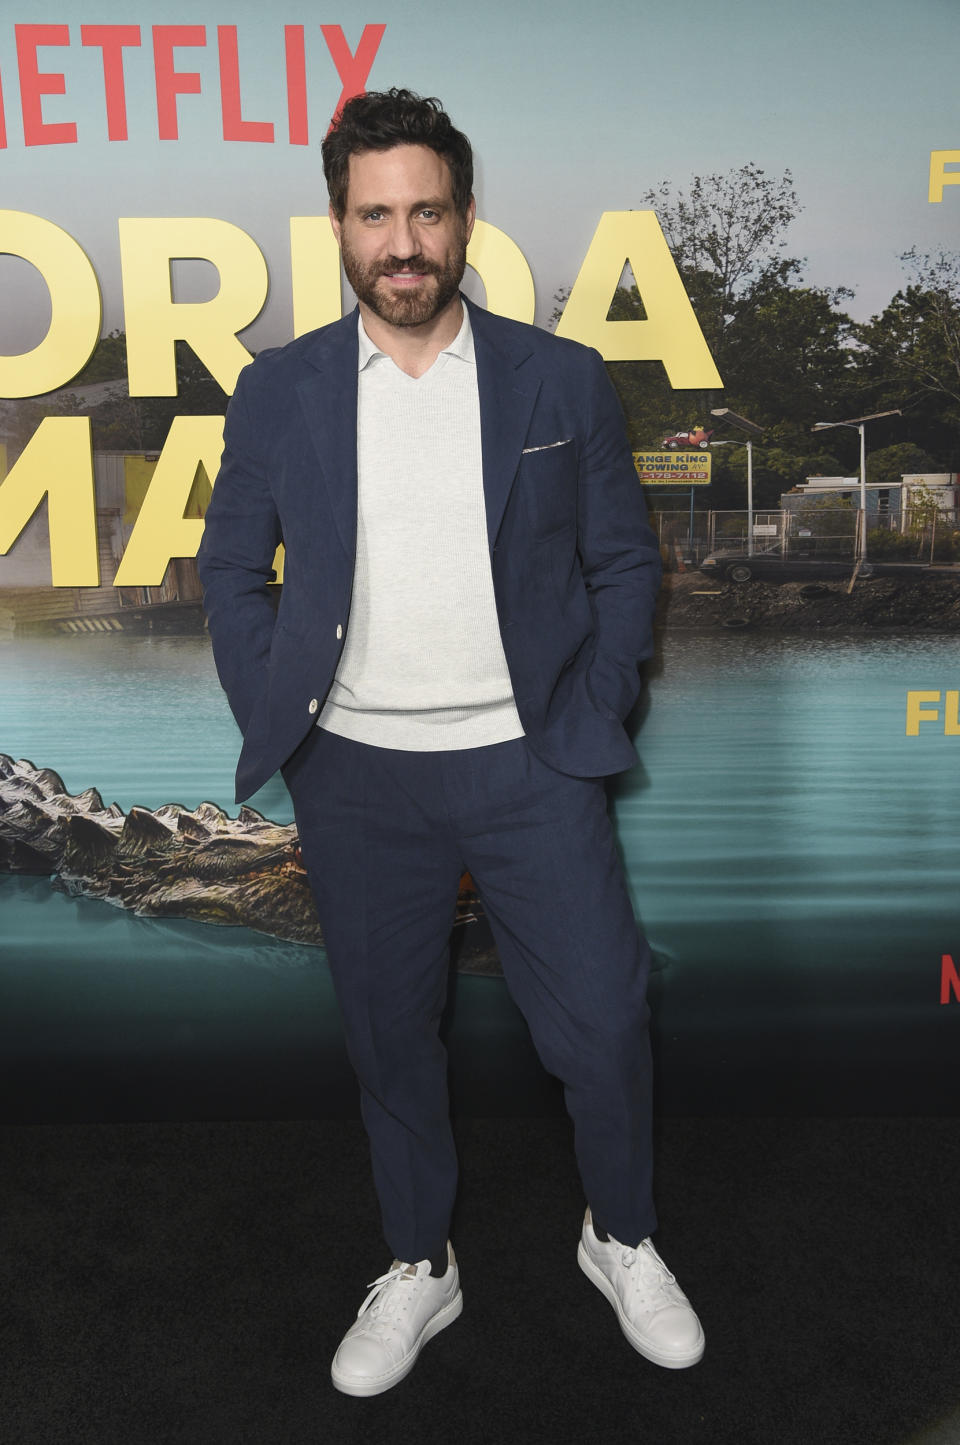 Edgar Ramirez arrives at the premiere of "Florida Man" on Wednesday, April 12, 2023, at the Roma Theater in Los Angeles. (Photo by Richard Shotwell/Invision/AP)